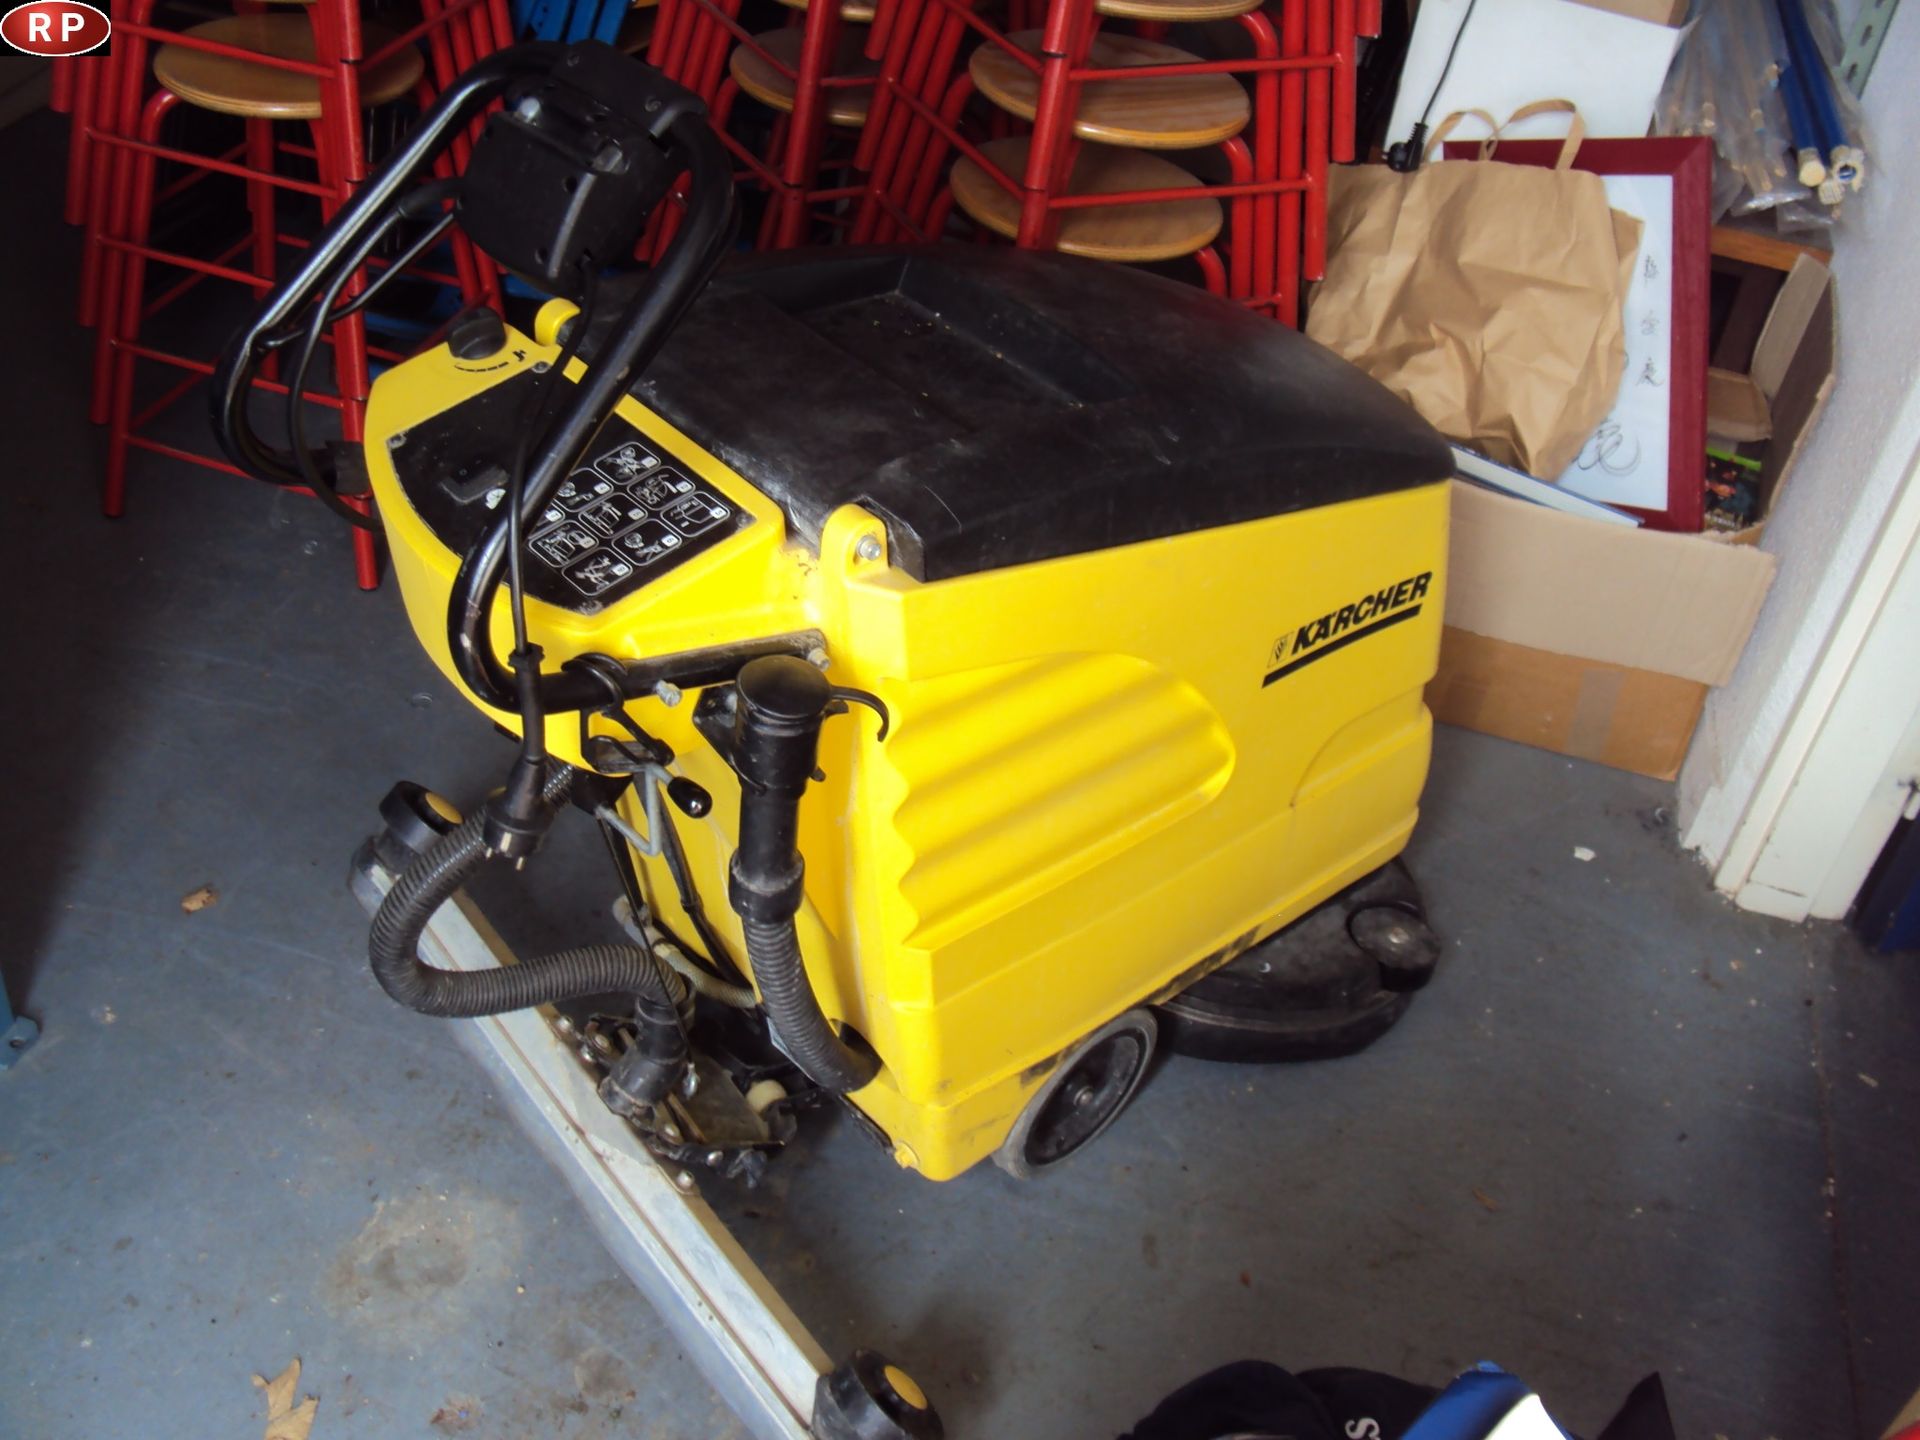 Null [RP] 
Lot of three equipment for maintenance of interior floors: 

- Corded&hellip;